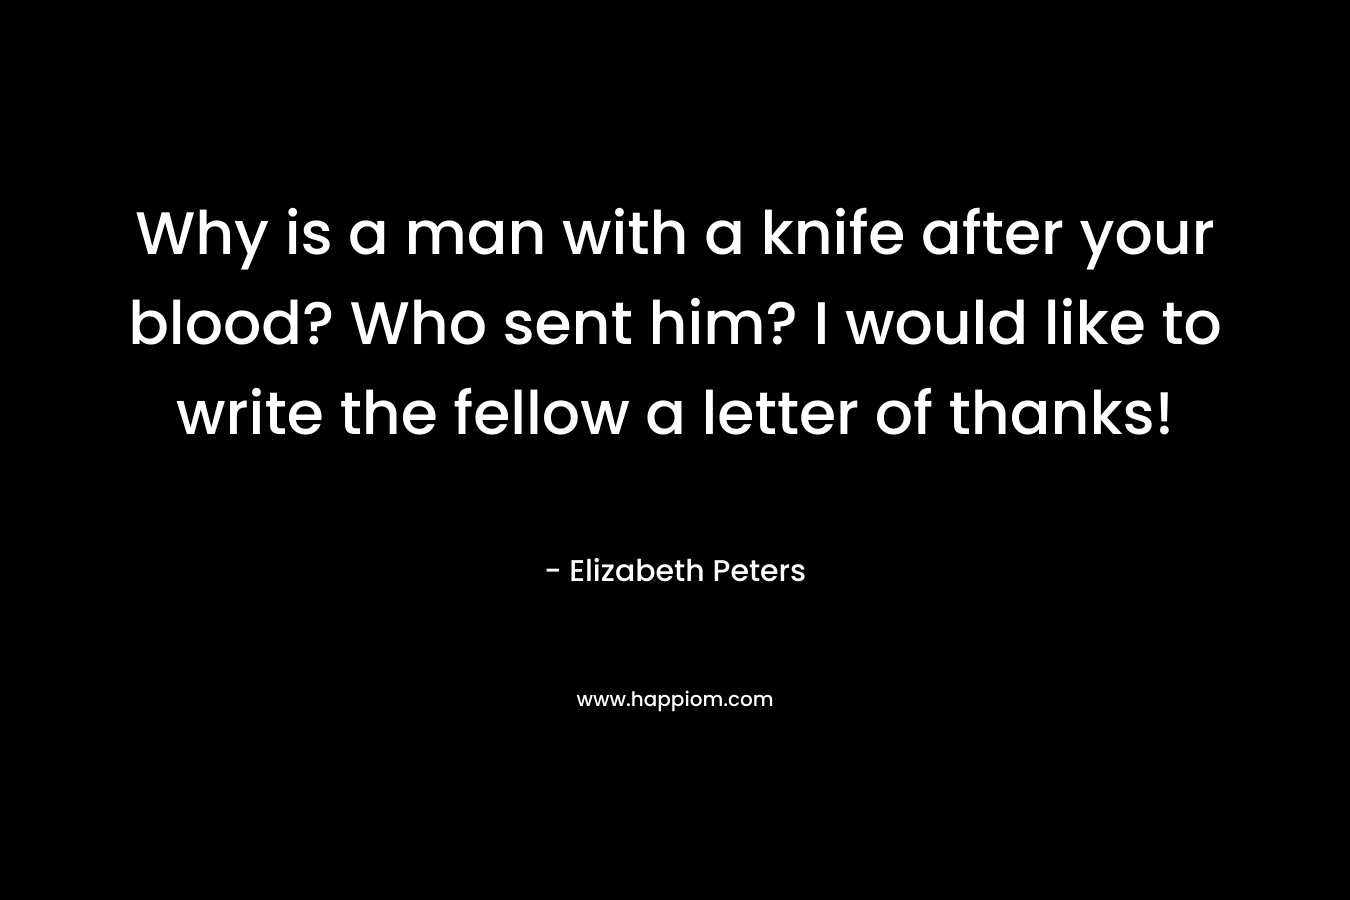 Why is a man with a knife after your blood? Who sent him? I would like to write the fellow a letter of thanks! – Elizabeth Peters